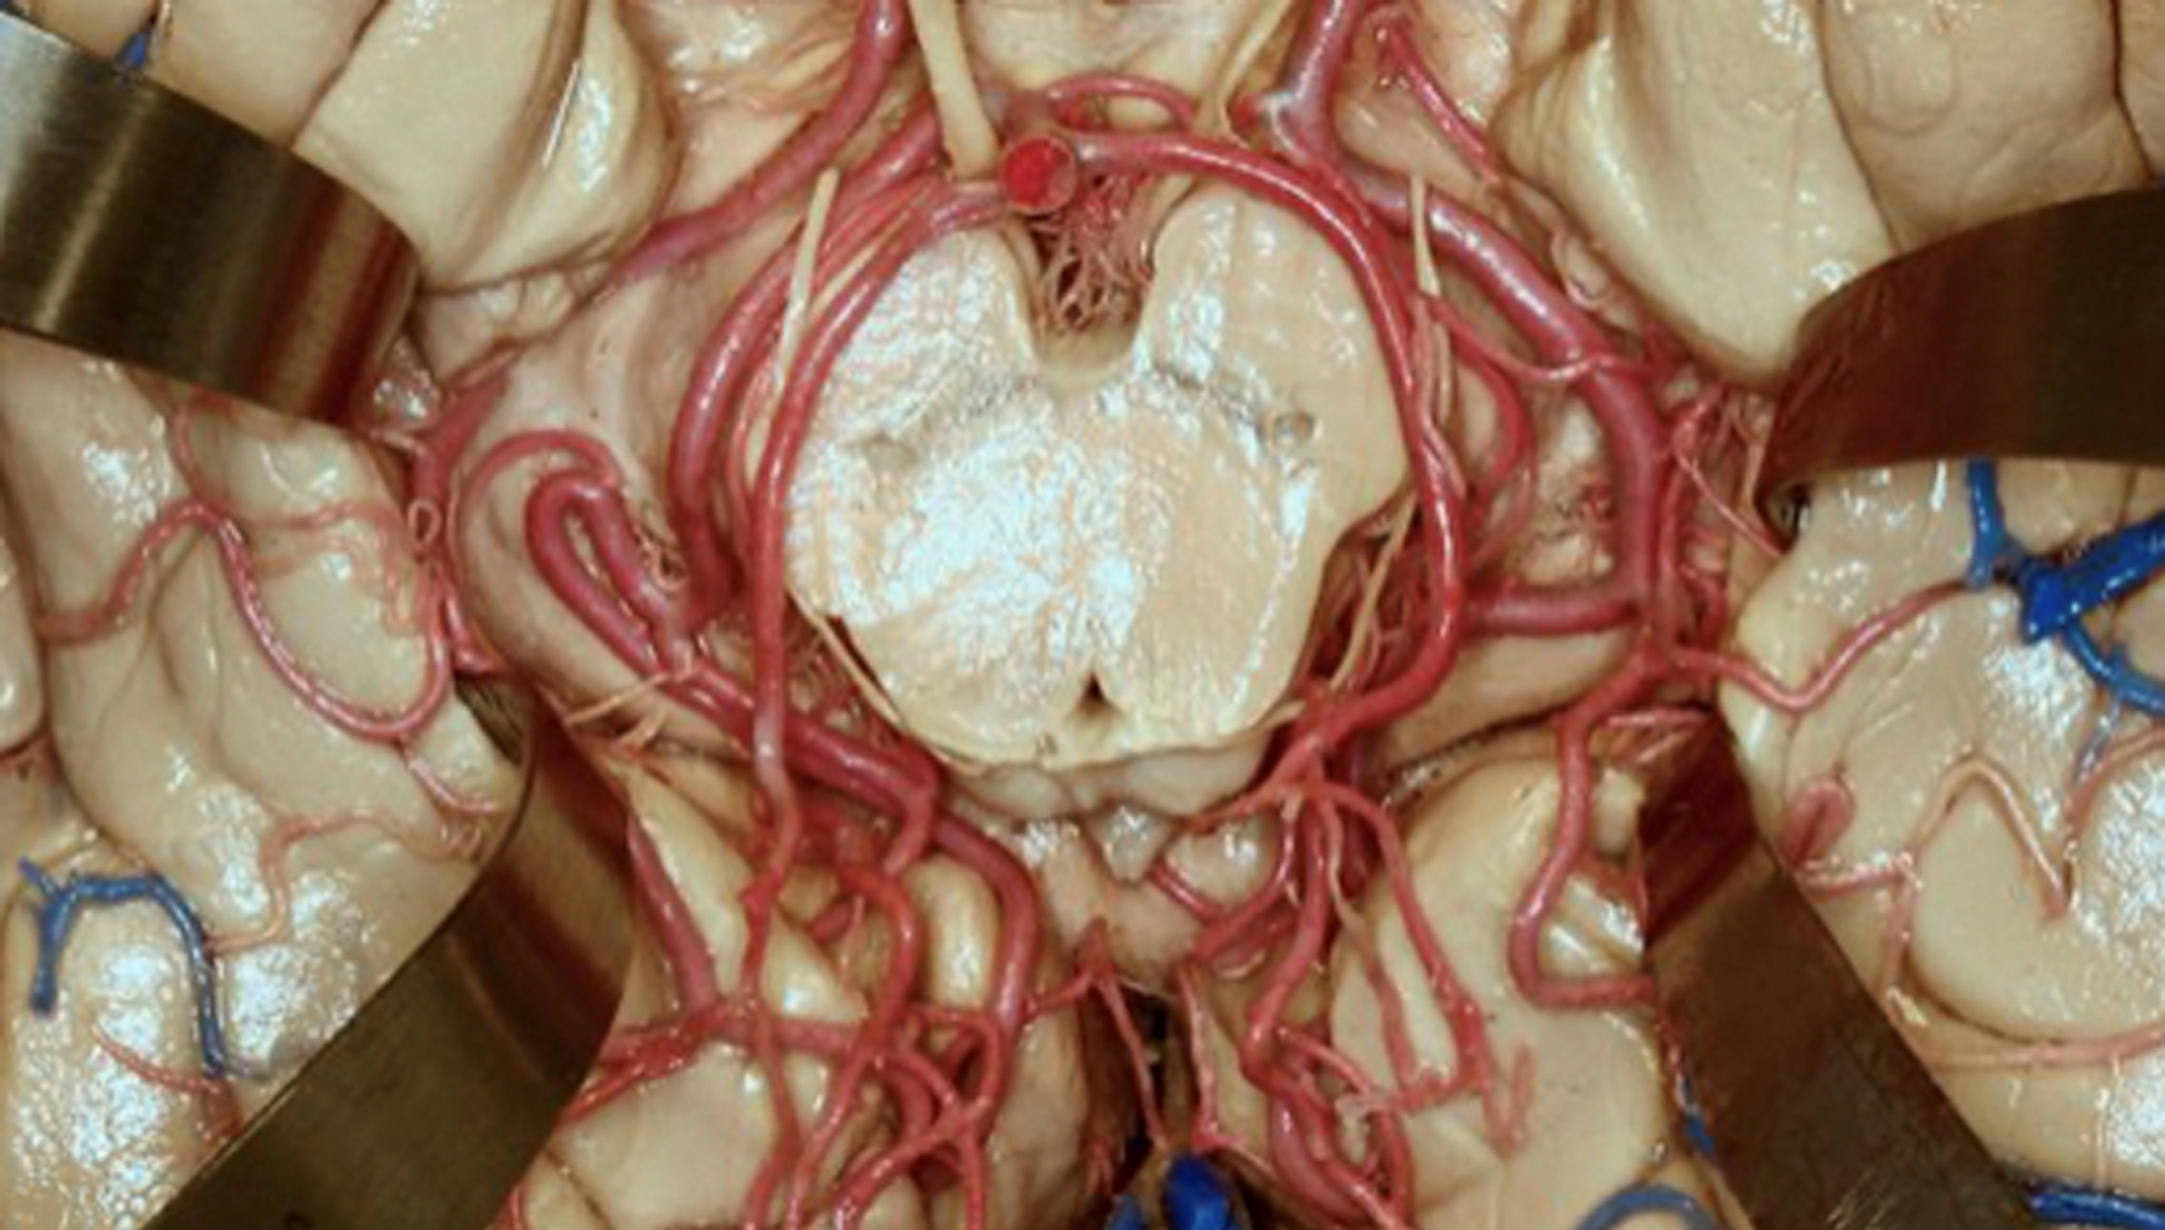 Vasculature surrounding the midbrain. Used by permission from the Neurosurgical Atlas by Aaron Cohen-Gadol, MD.